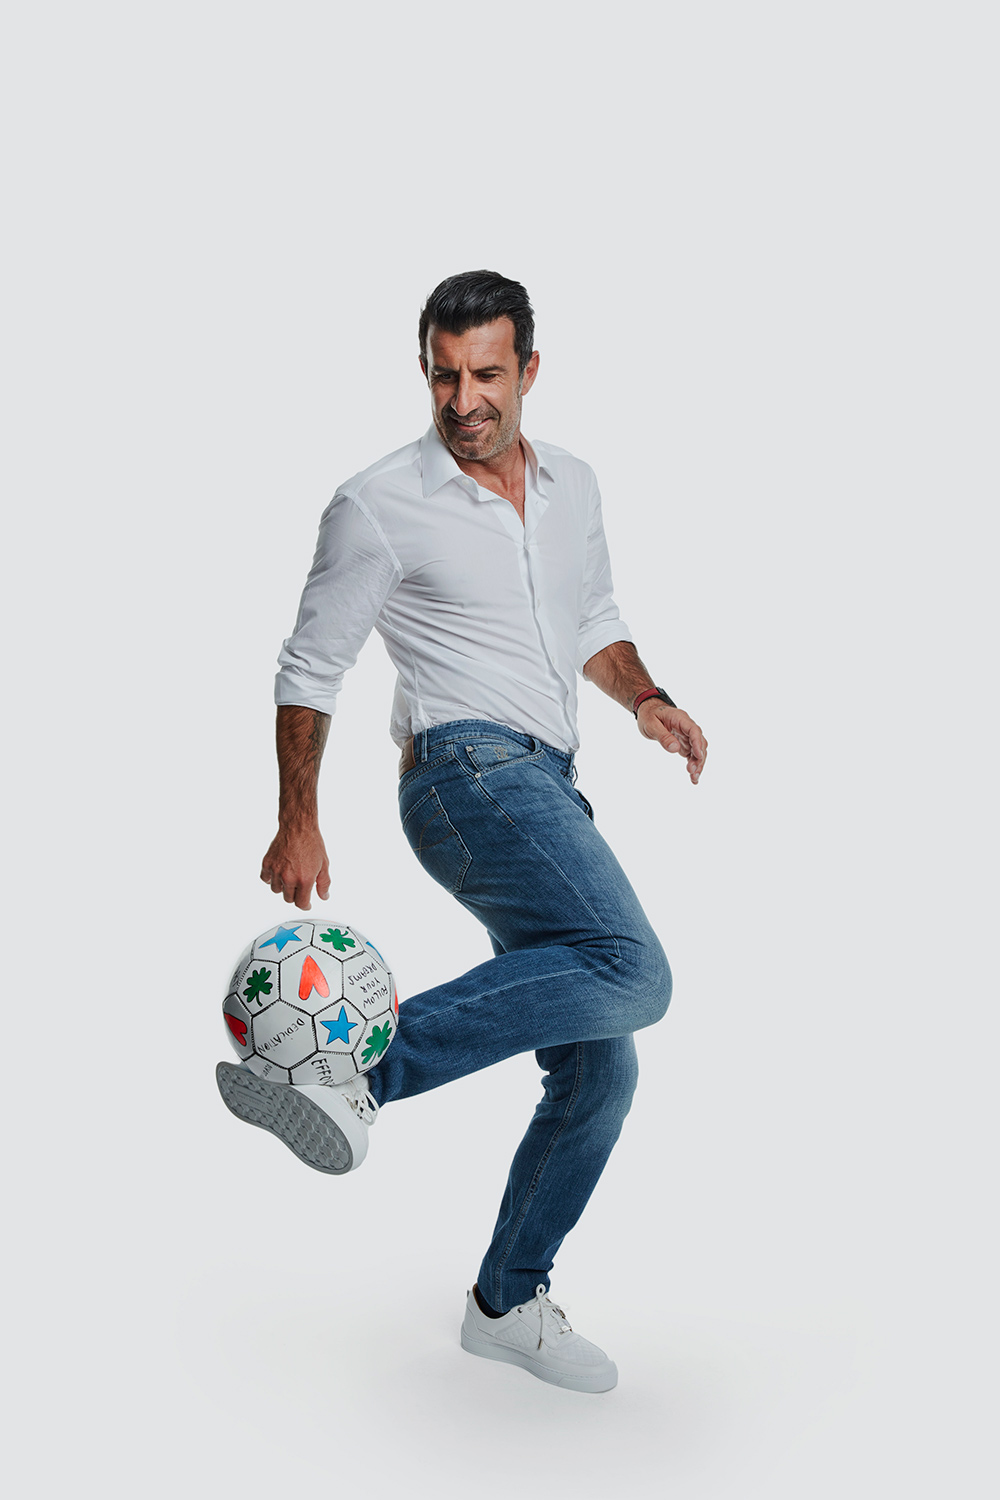 Hublot Loves Football Luis Figo with his dream football designed by Mira Mikati1 - FACES.ch